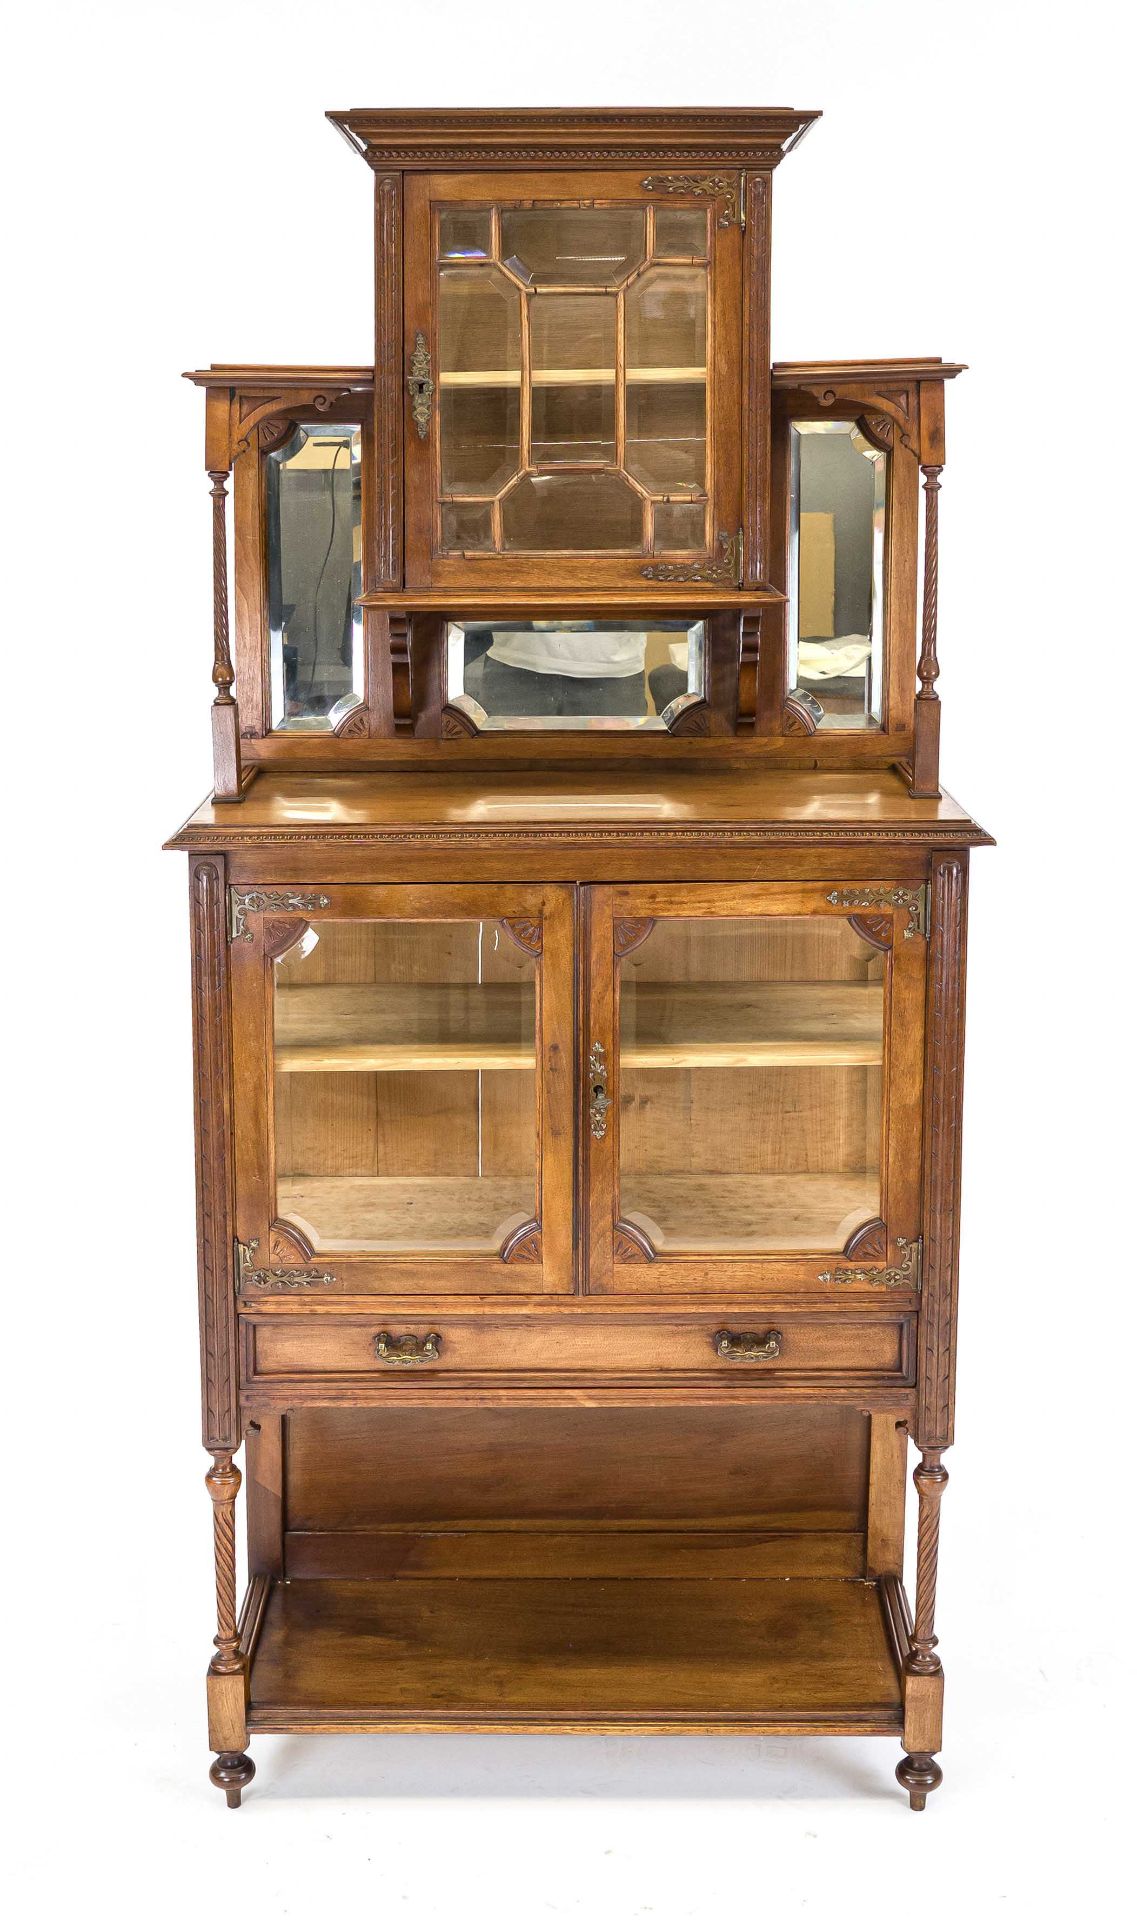 Ornamental cabinet, c. 1890, walnut, 2-door base with open compartment and faceted glazing, top with